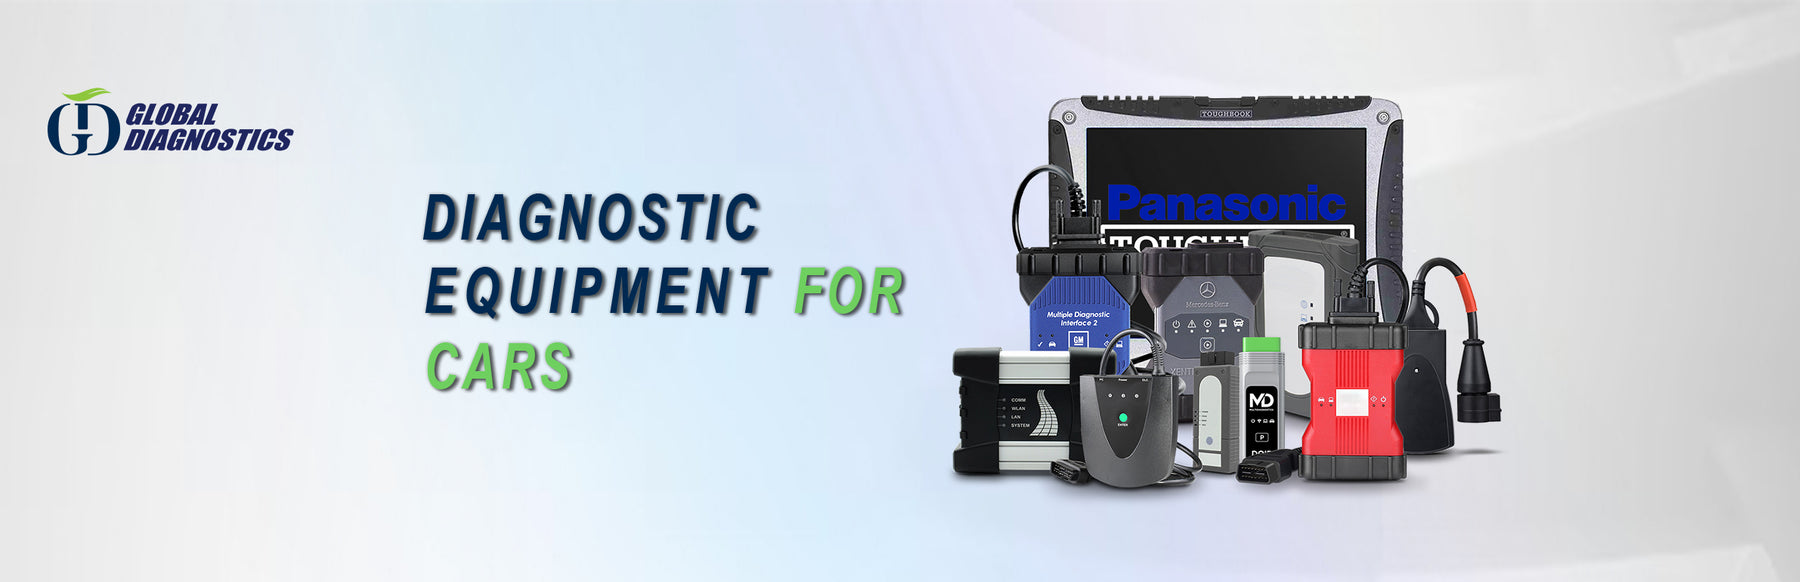 What are the various diagnostic equipment for cars